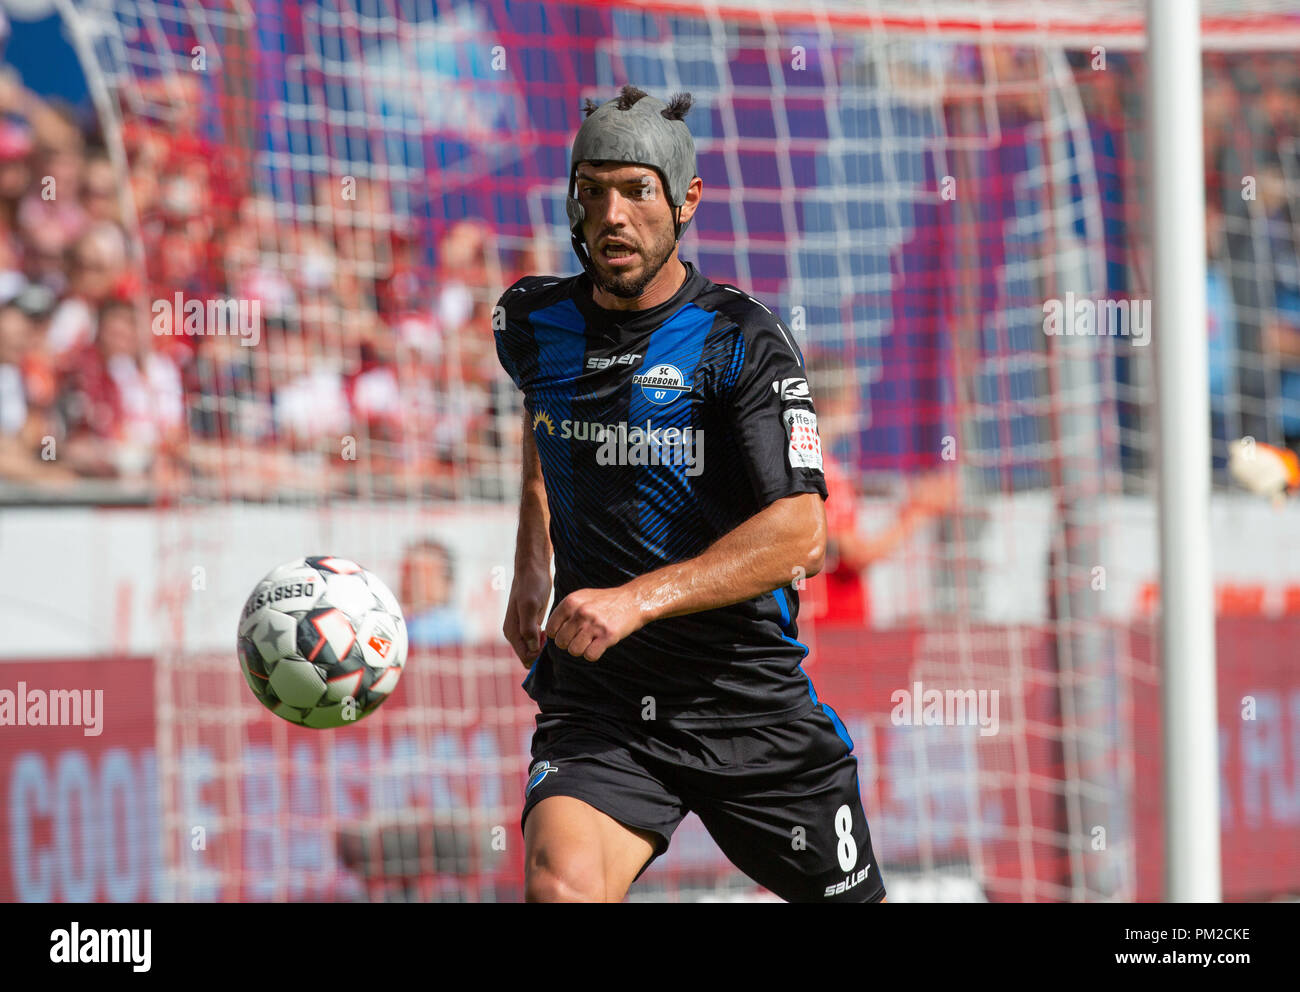 Cologne, Germany September 16 2018, 2nd league, matchday 5, 1. FC Koeln - SC Paderborn: Klaus Gjasula (Paderborn) in action.     DFL REGULATIONS PROHIBIT ANY USE OF PHOTOGRAPHS AS IMAGE SEQUENCES AND/OR QUASI-VIDEO.             Credit: Juergen Schwarz/Alamy Live News Stock Photo